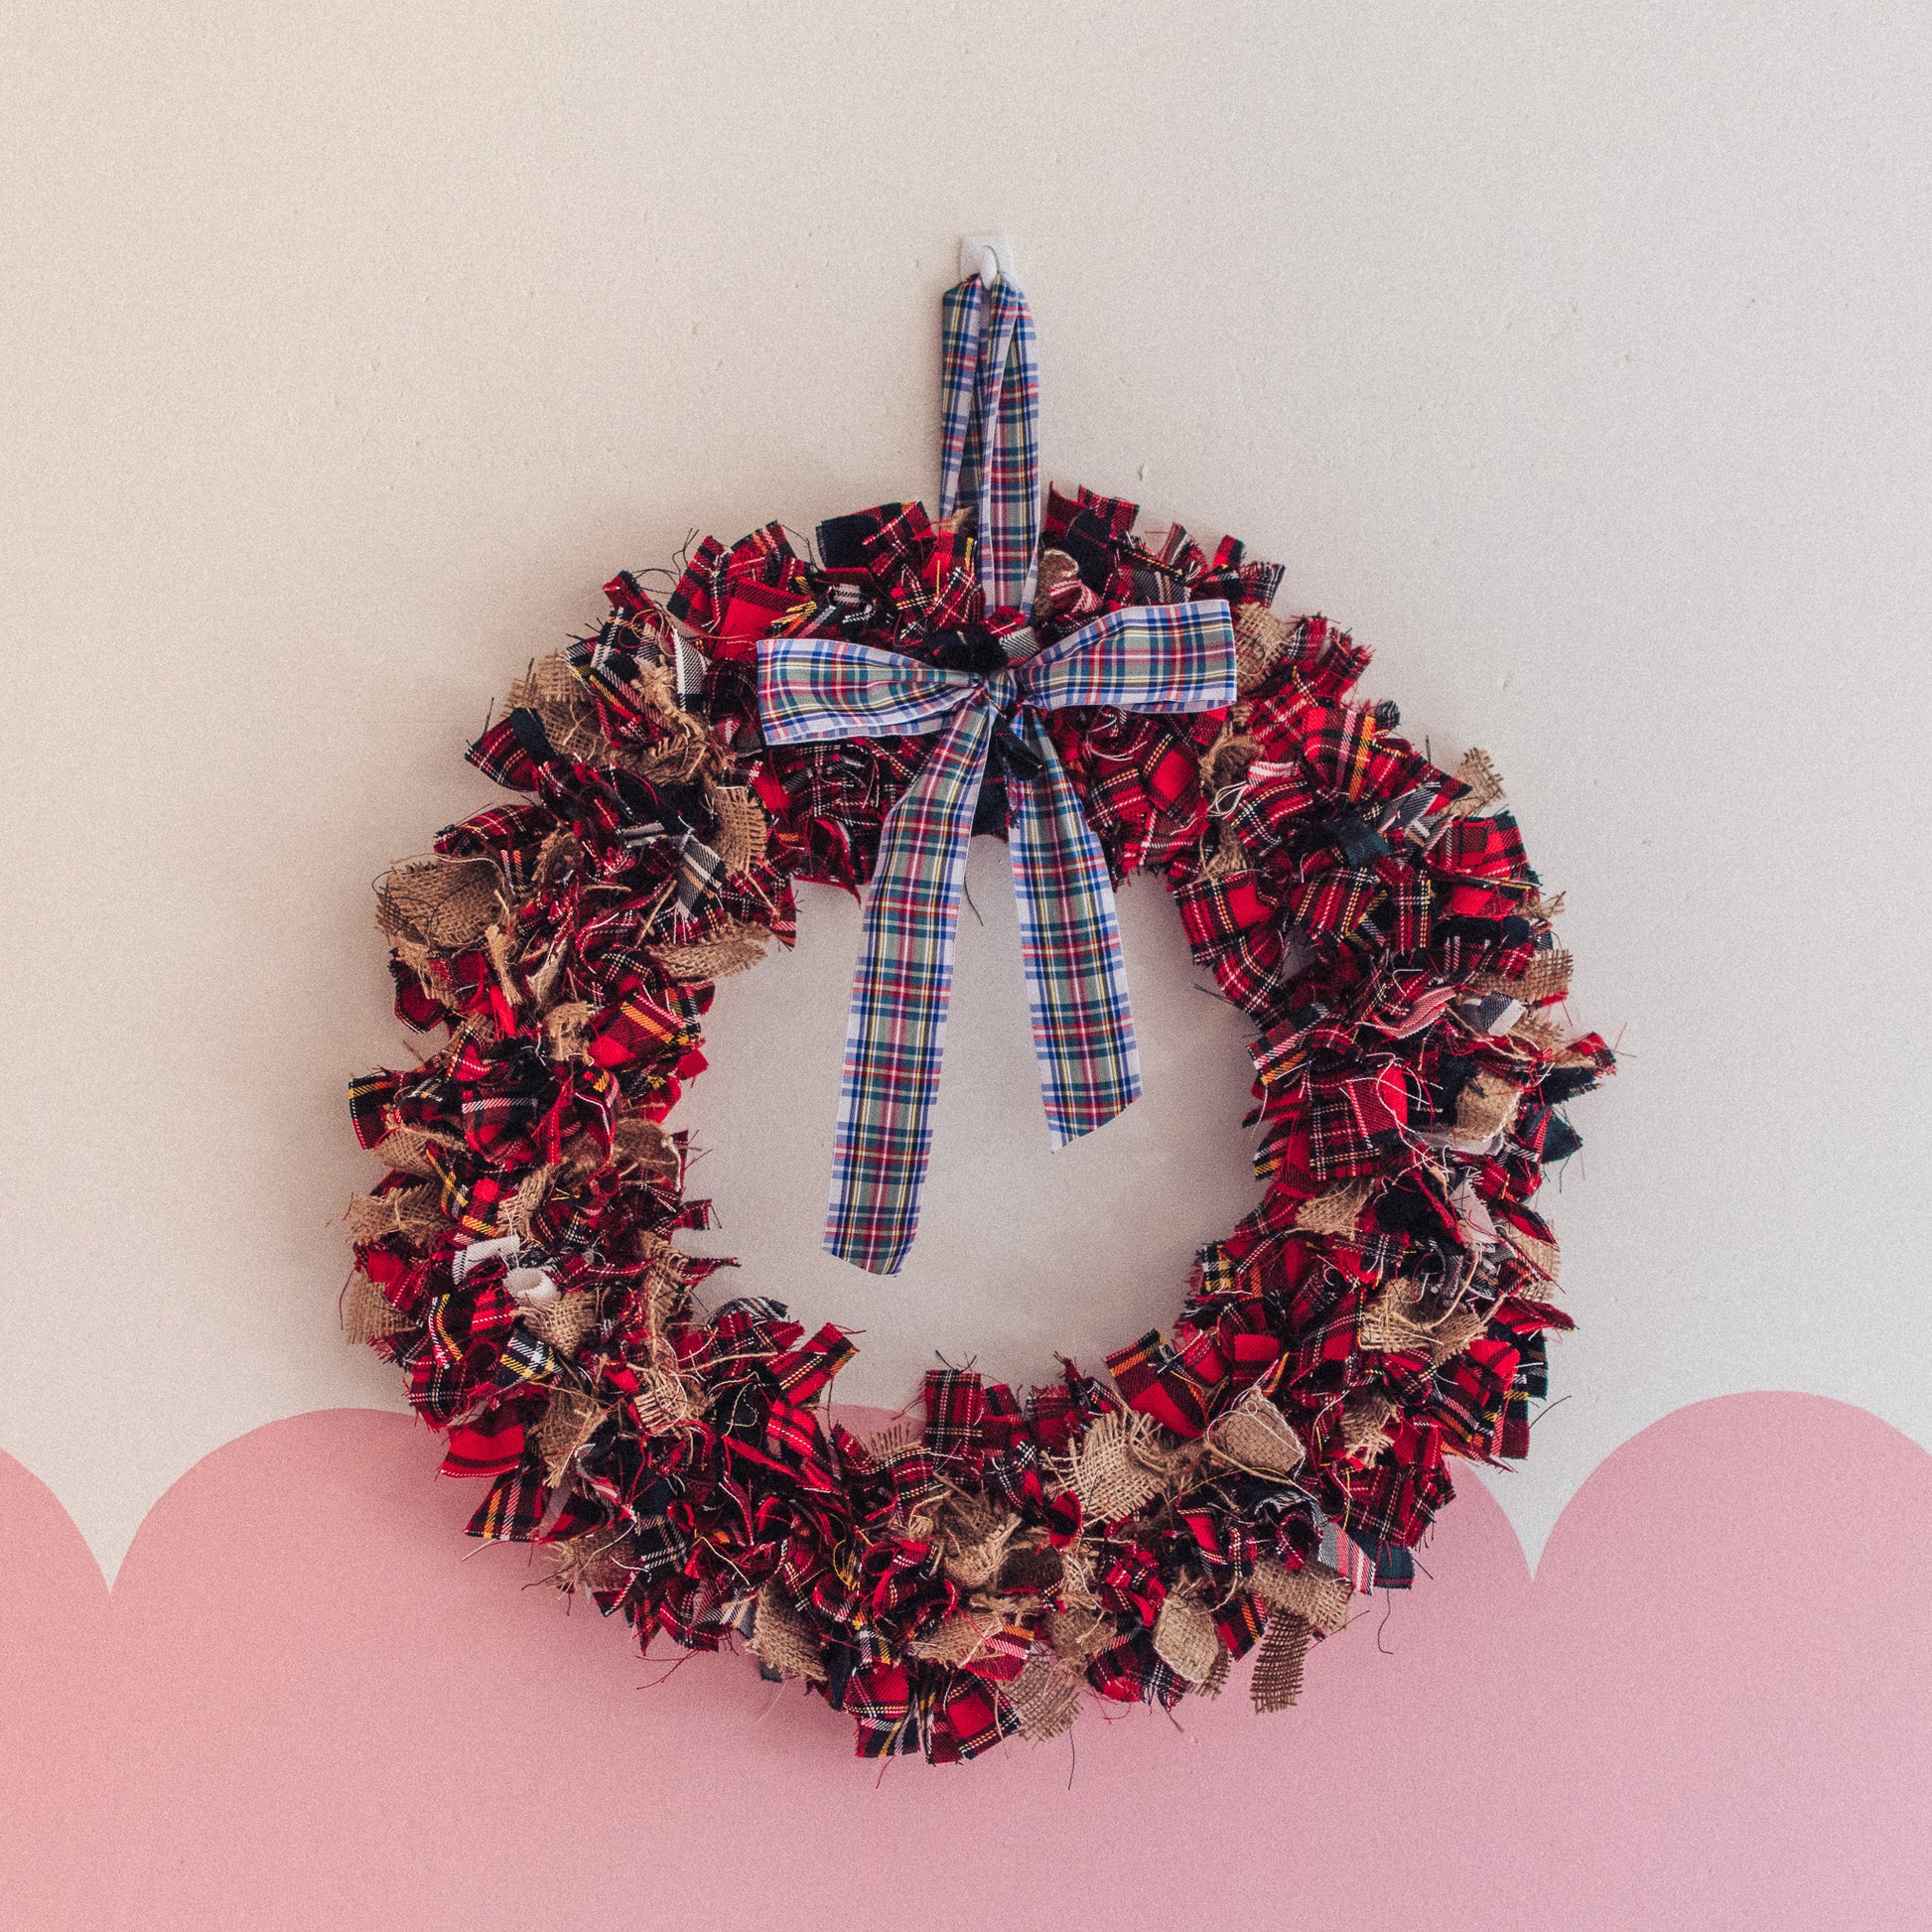 F&B Crafts - Red Tartan and Hessian Wreath - Autumn and Winter Home Decor